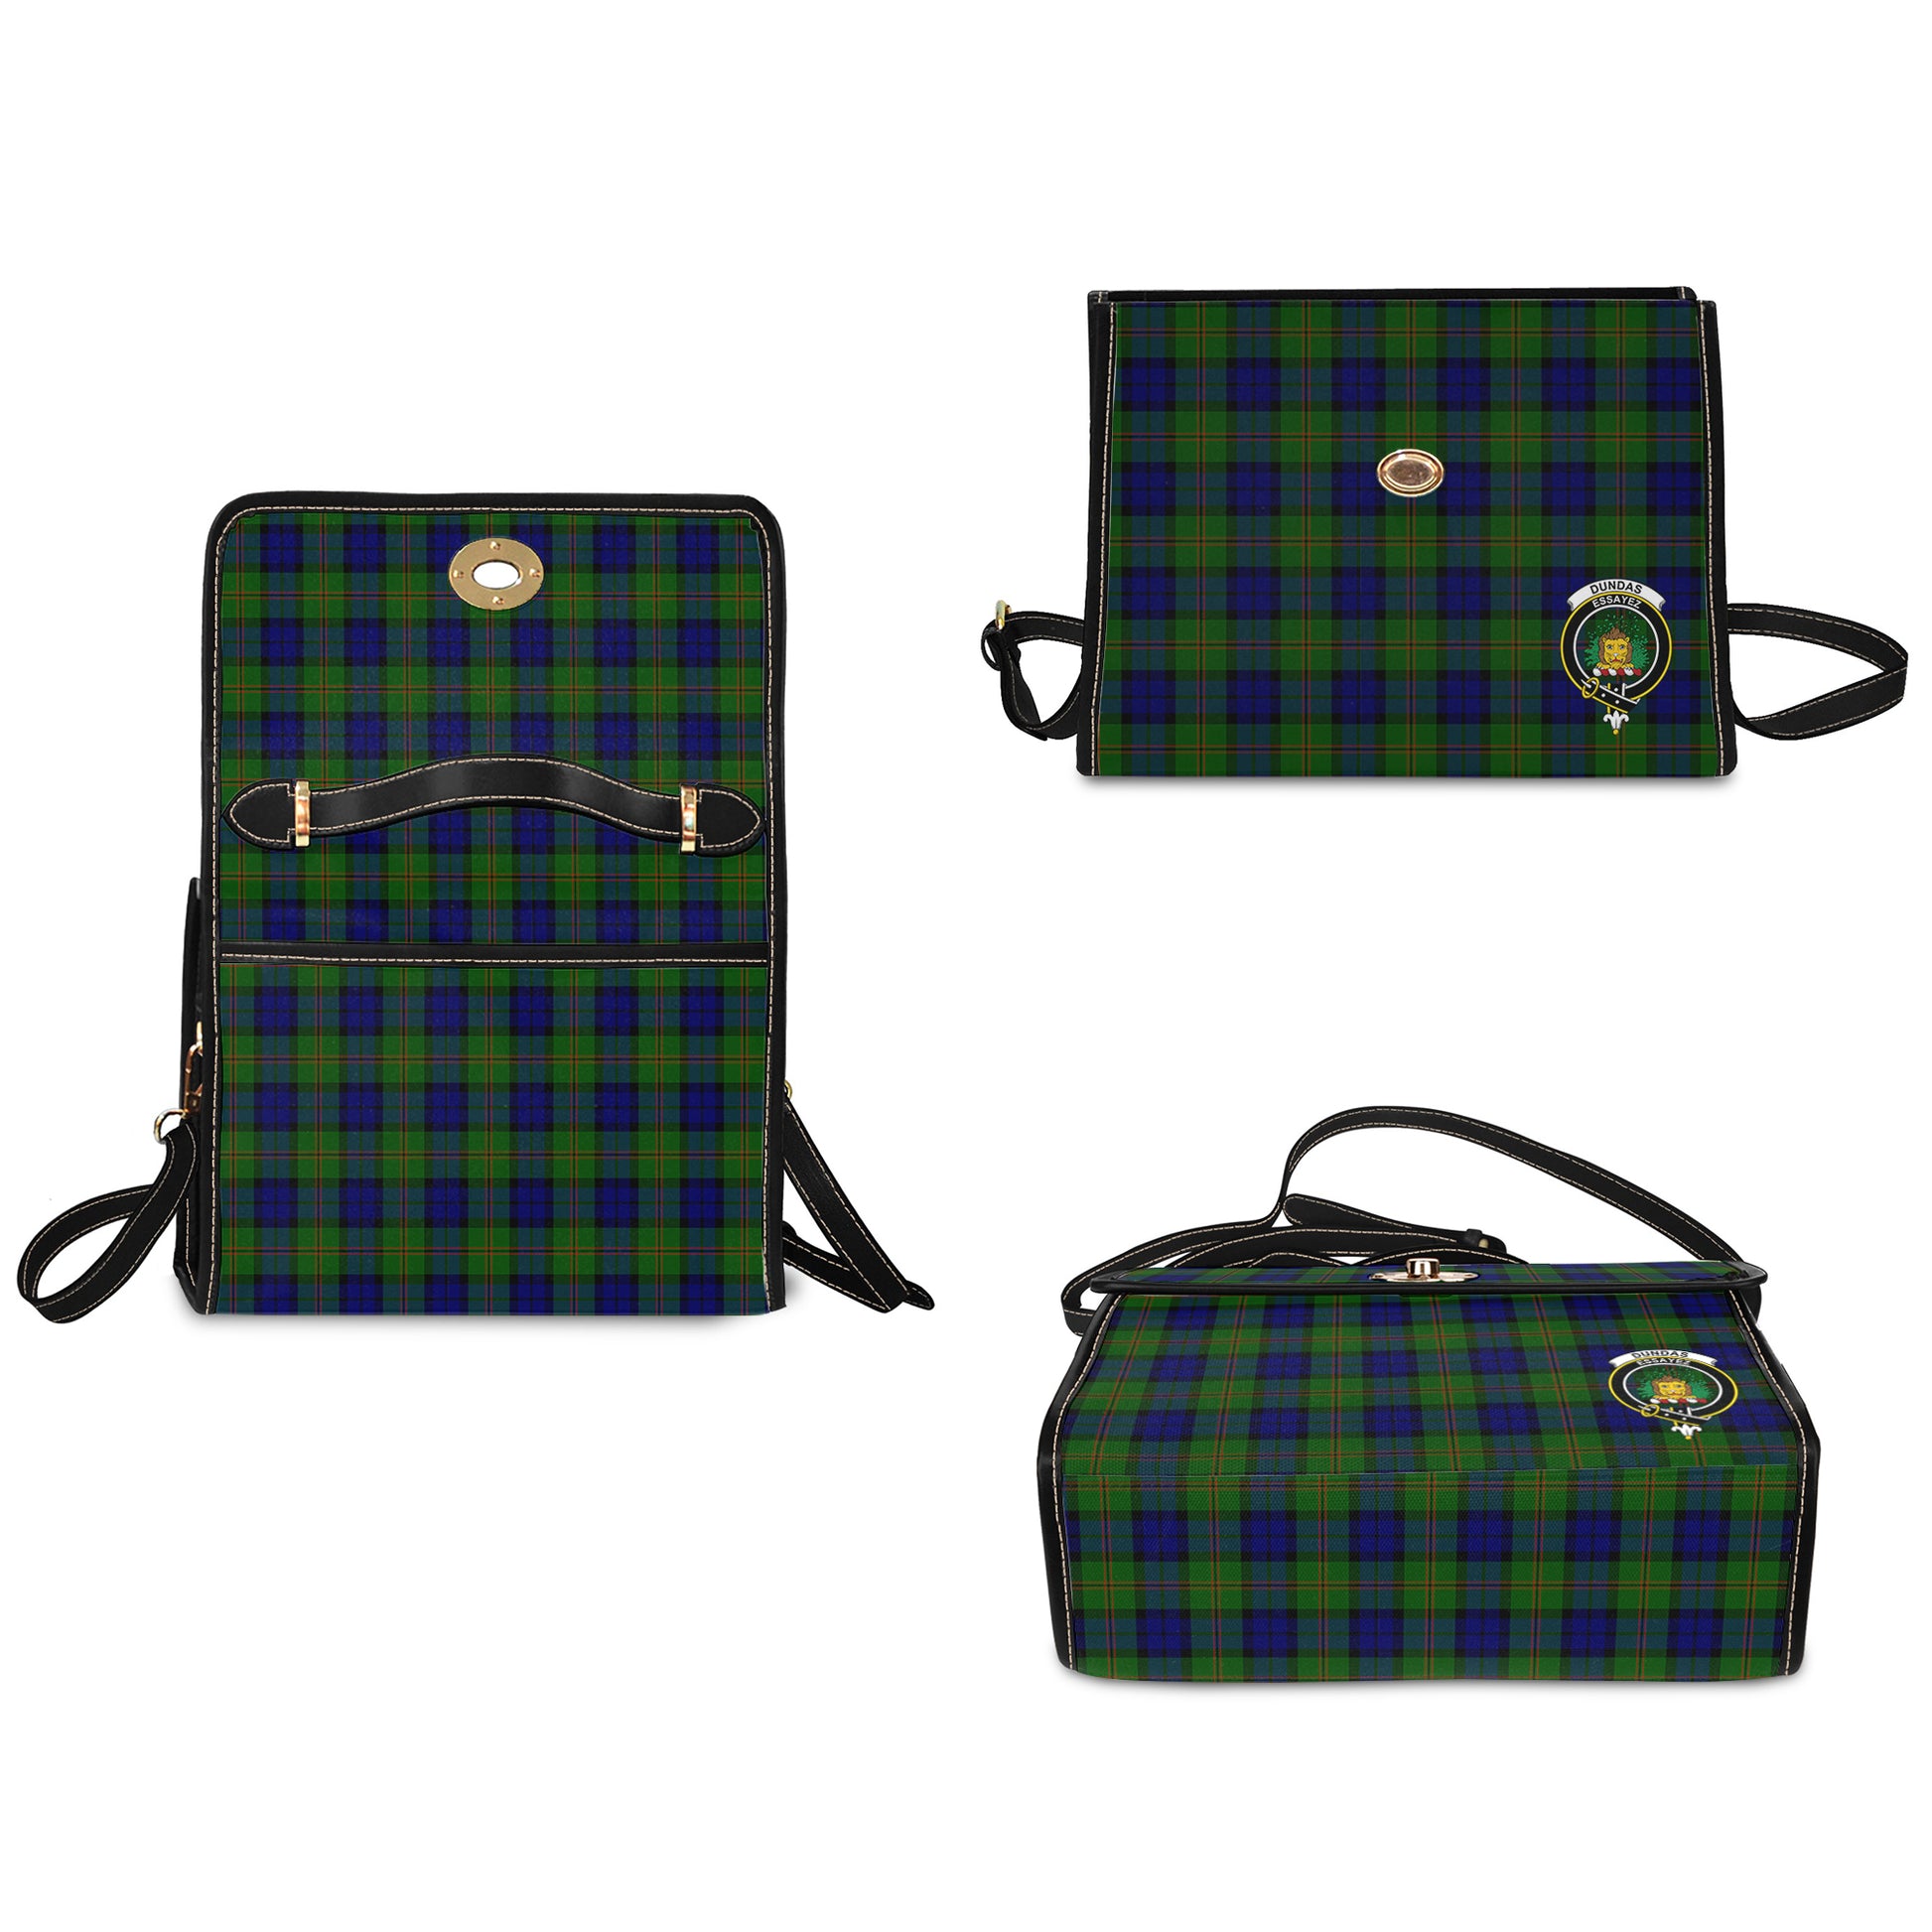 dundas-modern-tartan-leather-strap-waterproof-canvas-bag-with-family-crest